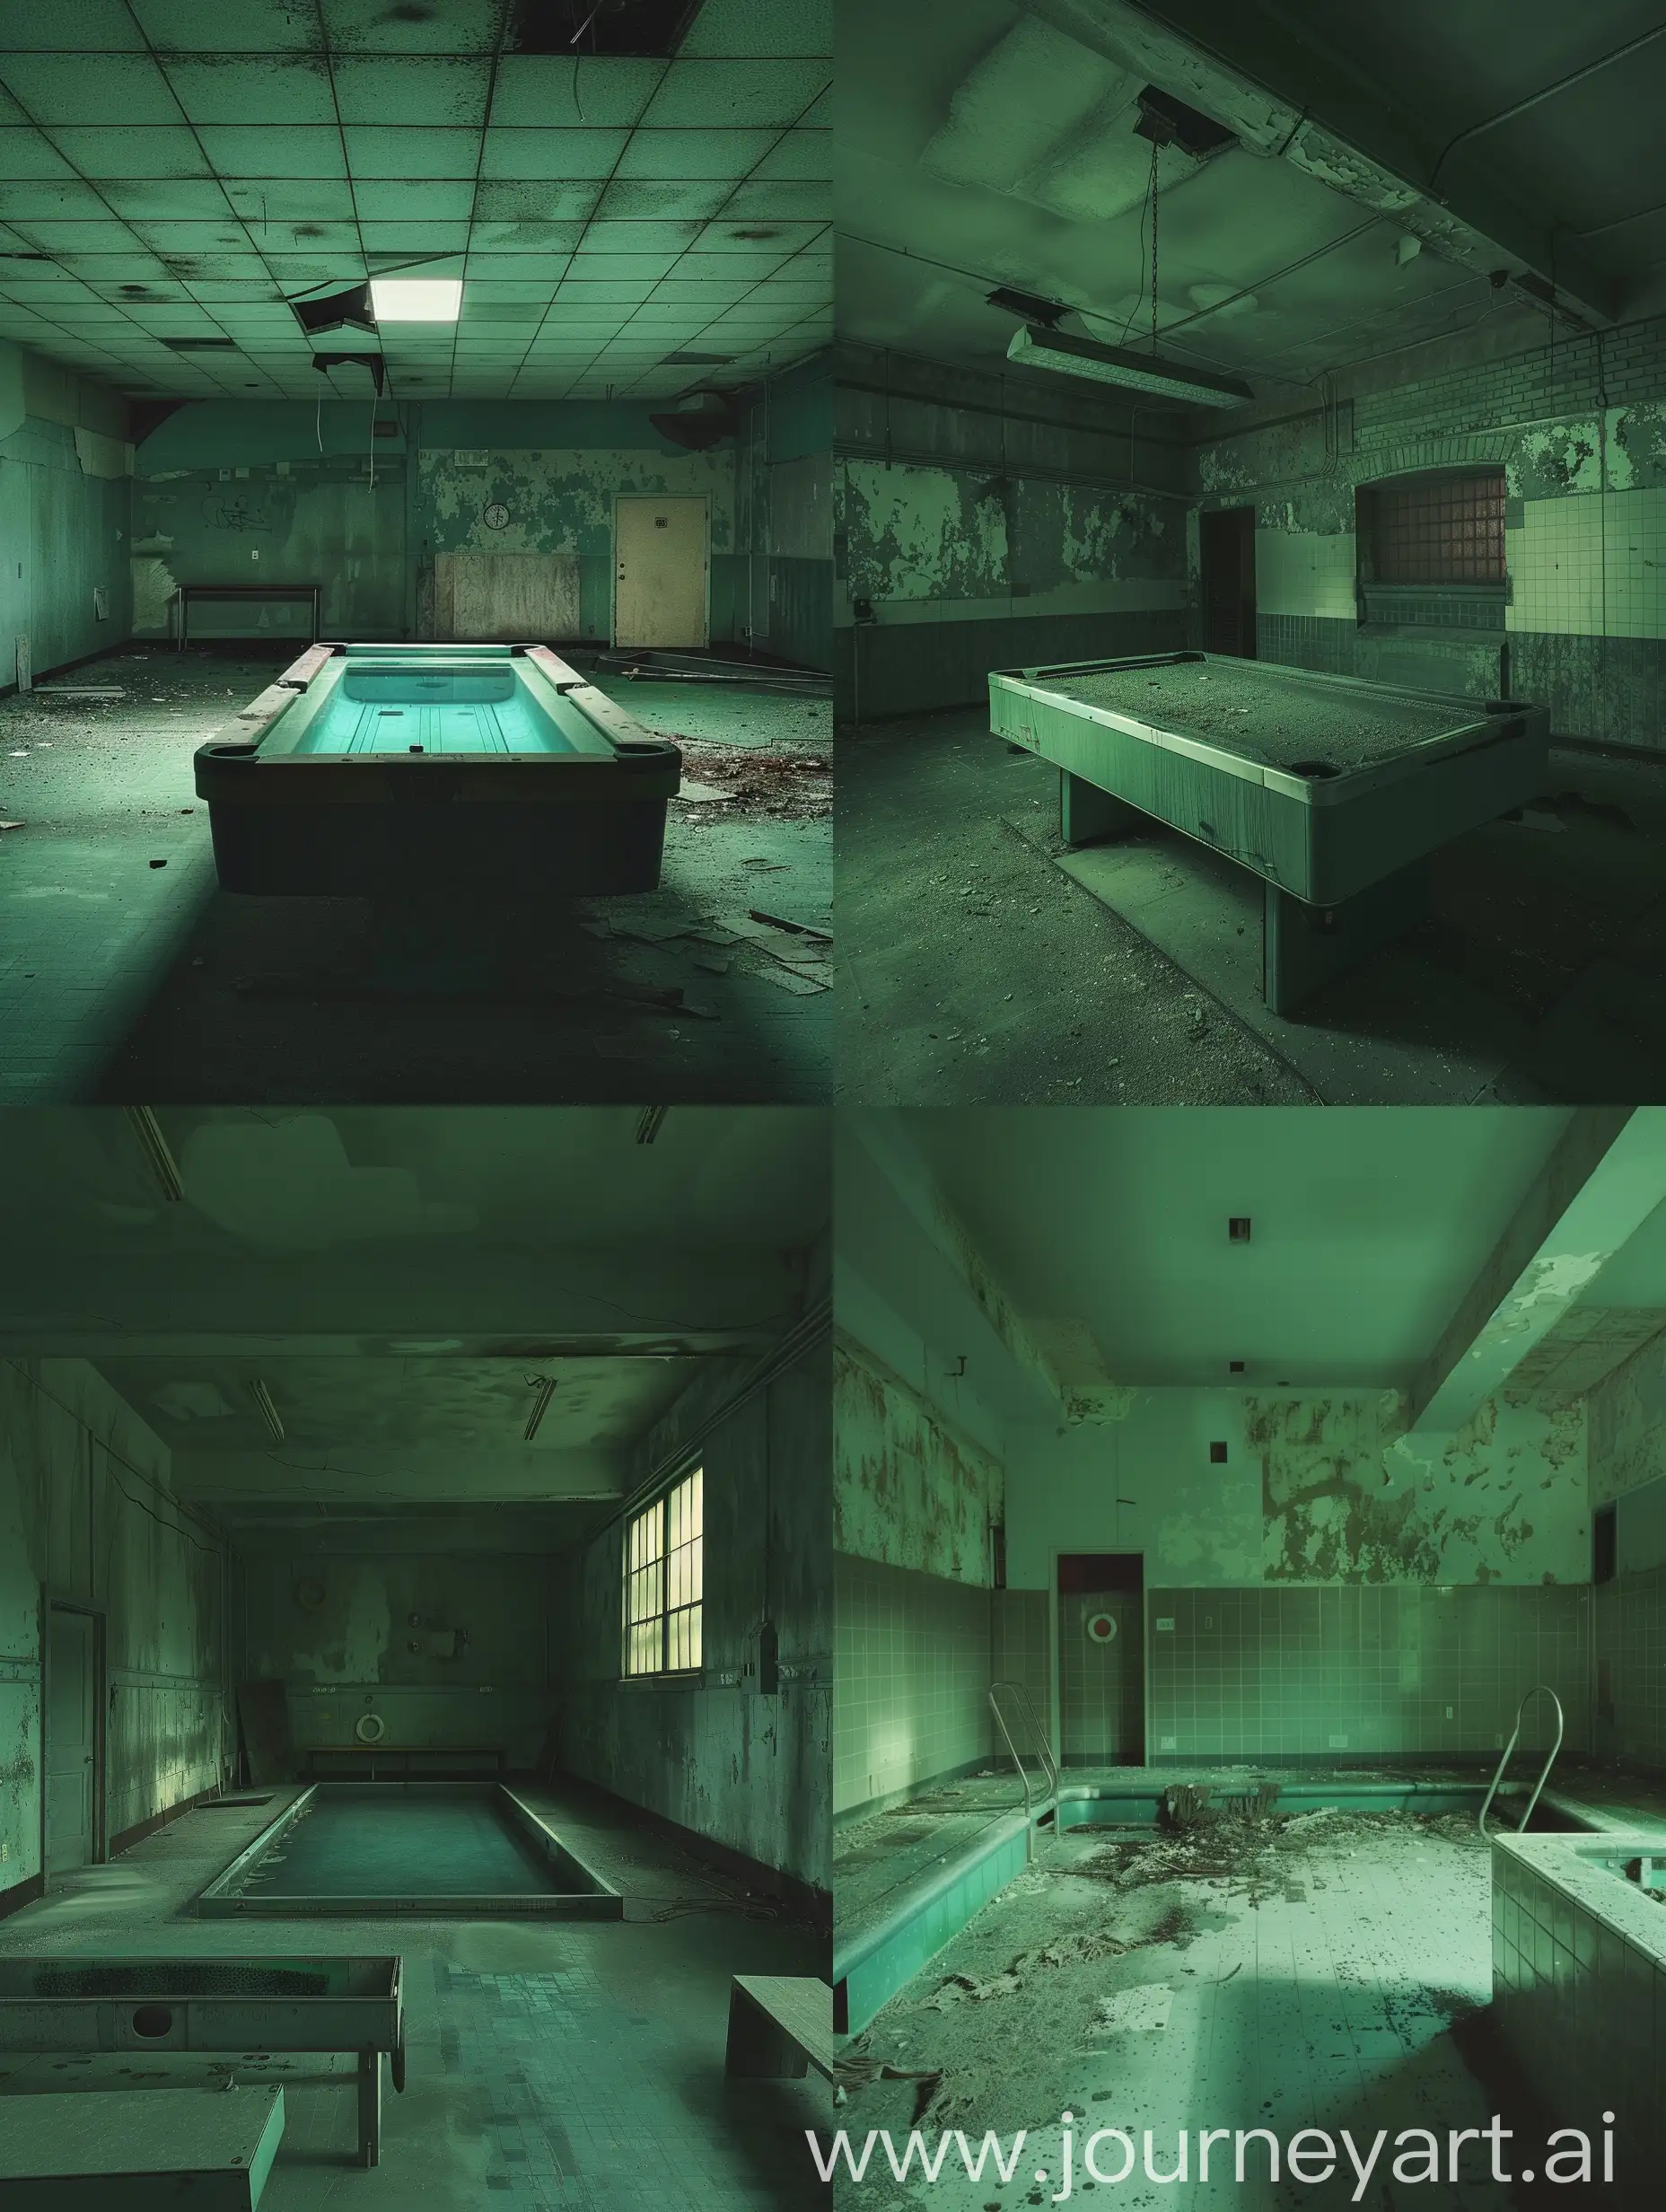 Early 2000s found footage, empty and eerie pool room, muted green tones